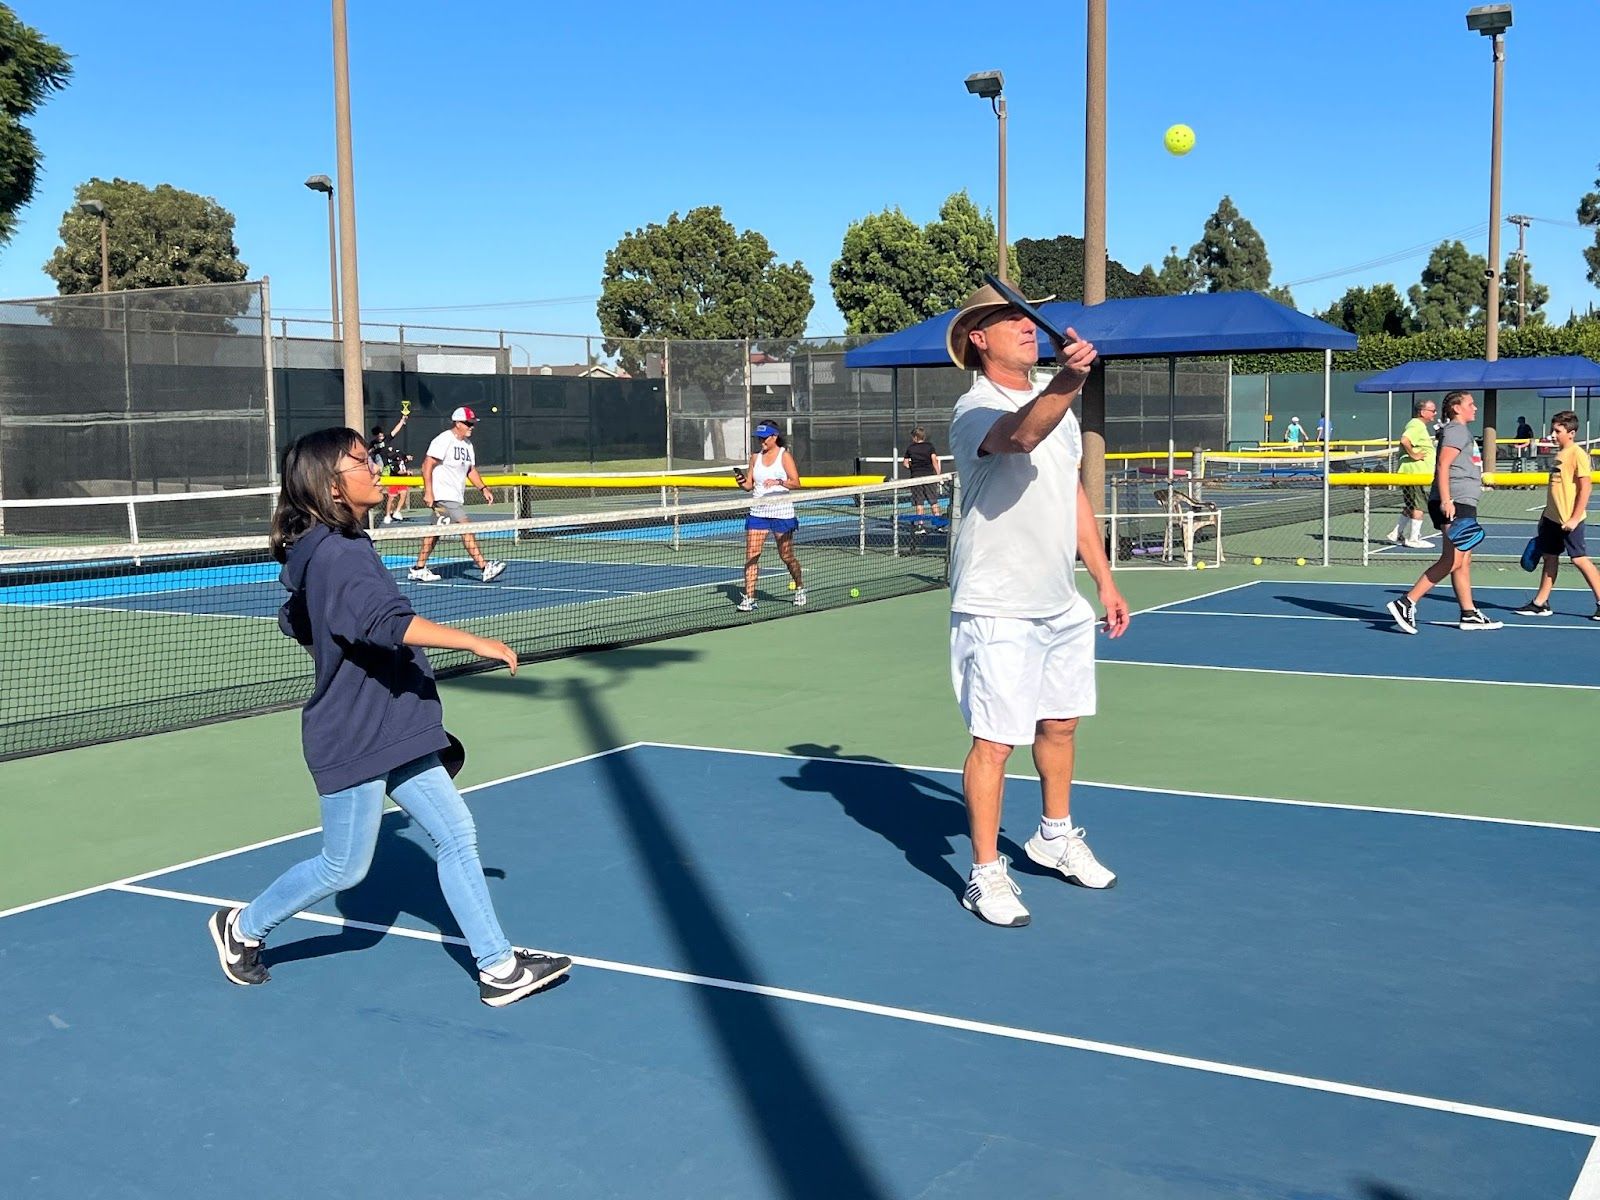 Seal Beach Pickleball Association President Mike Varipapa works with a student from the McAuliffe Pickleball Club on Oct. 19. Photo by Nichole Pichardo of Los Alamitos USD.